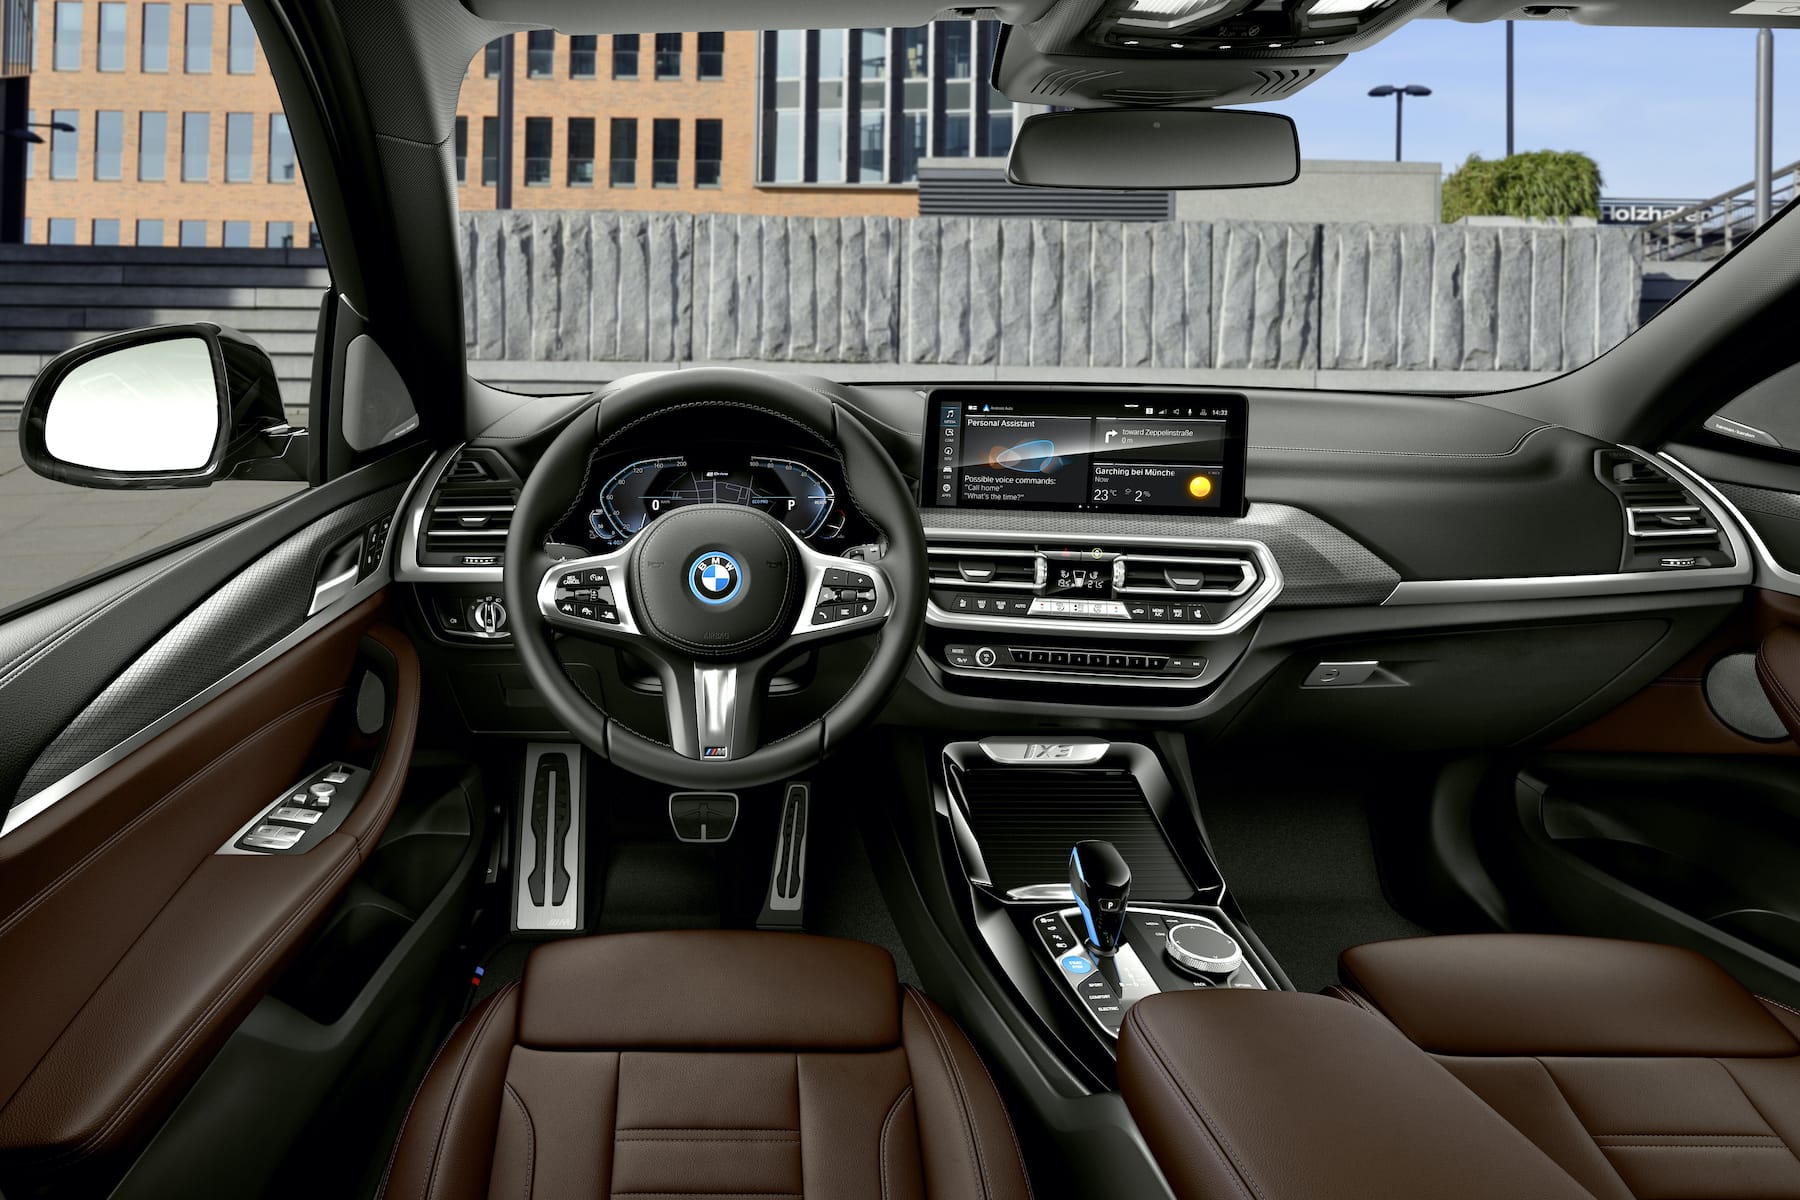 BMW iX3 (2022 facelift) – interior and dashboard